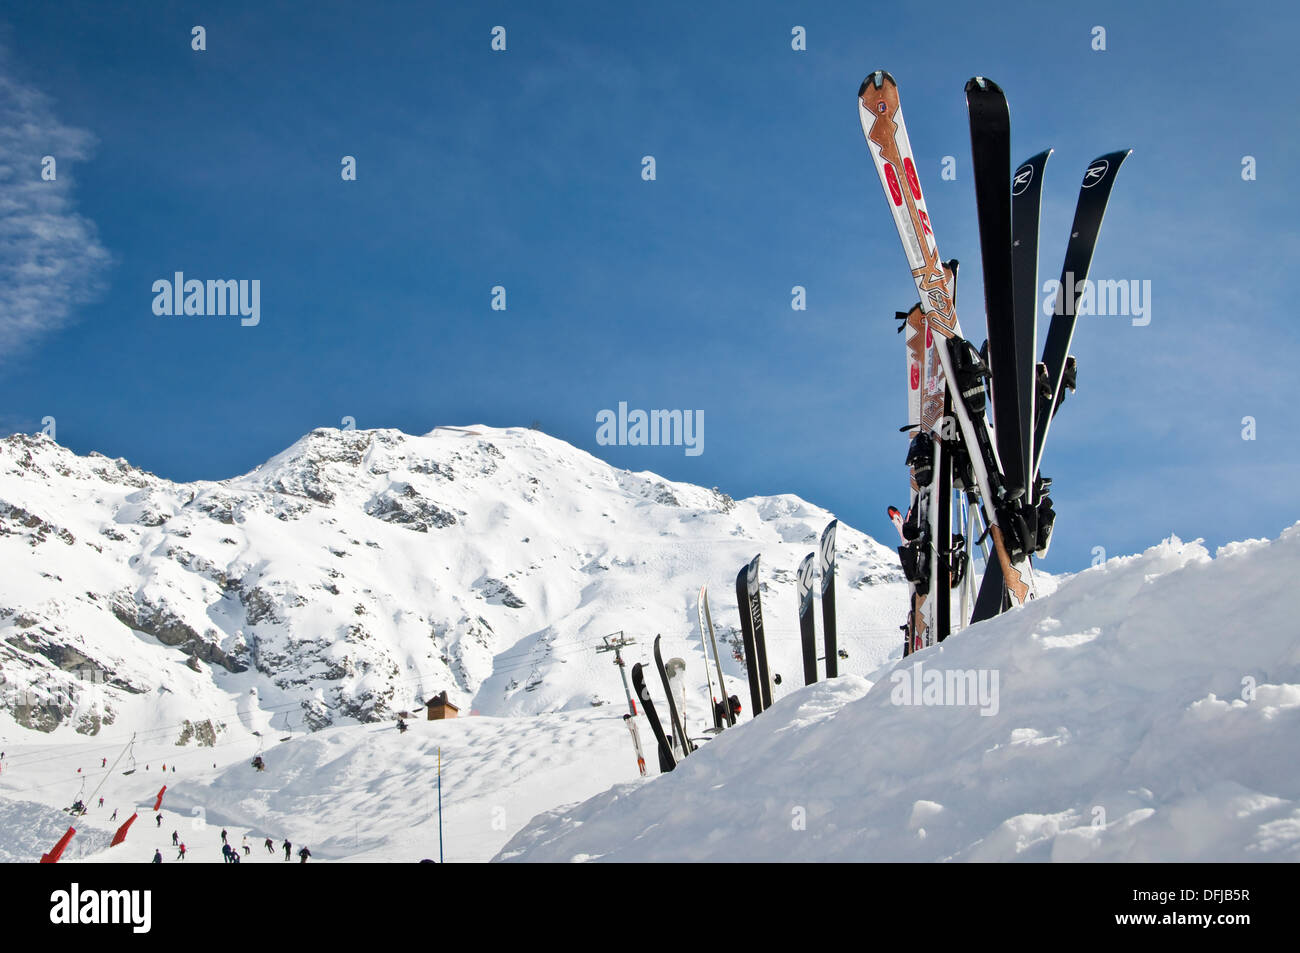 Skis standing in the snow, mountain background Stock Photo